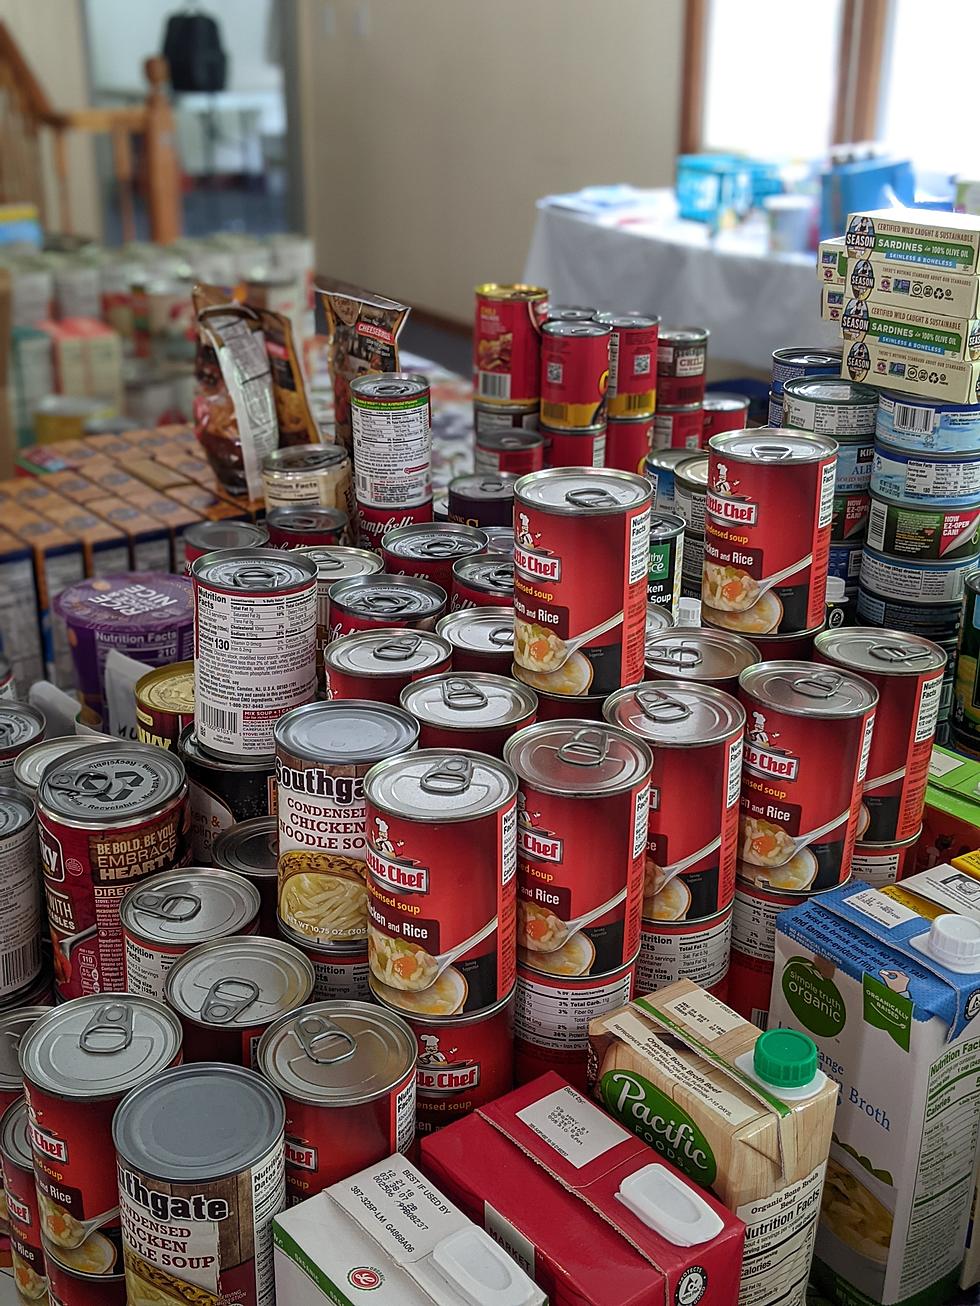 Make A Difference At The First Annual Townsquare Cares Food Drive